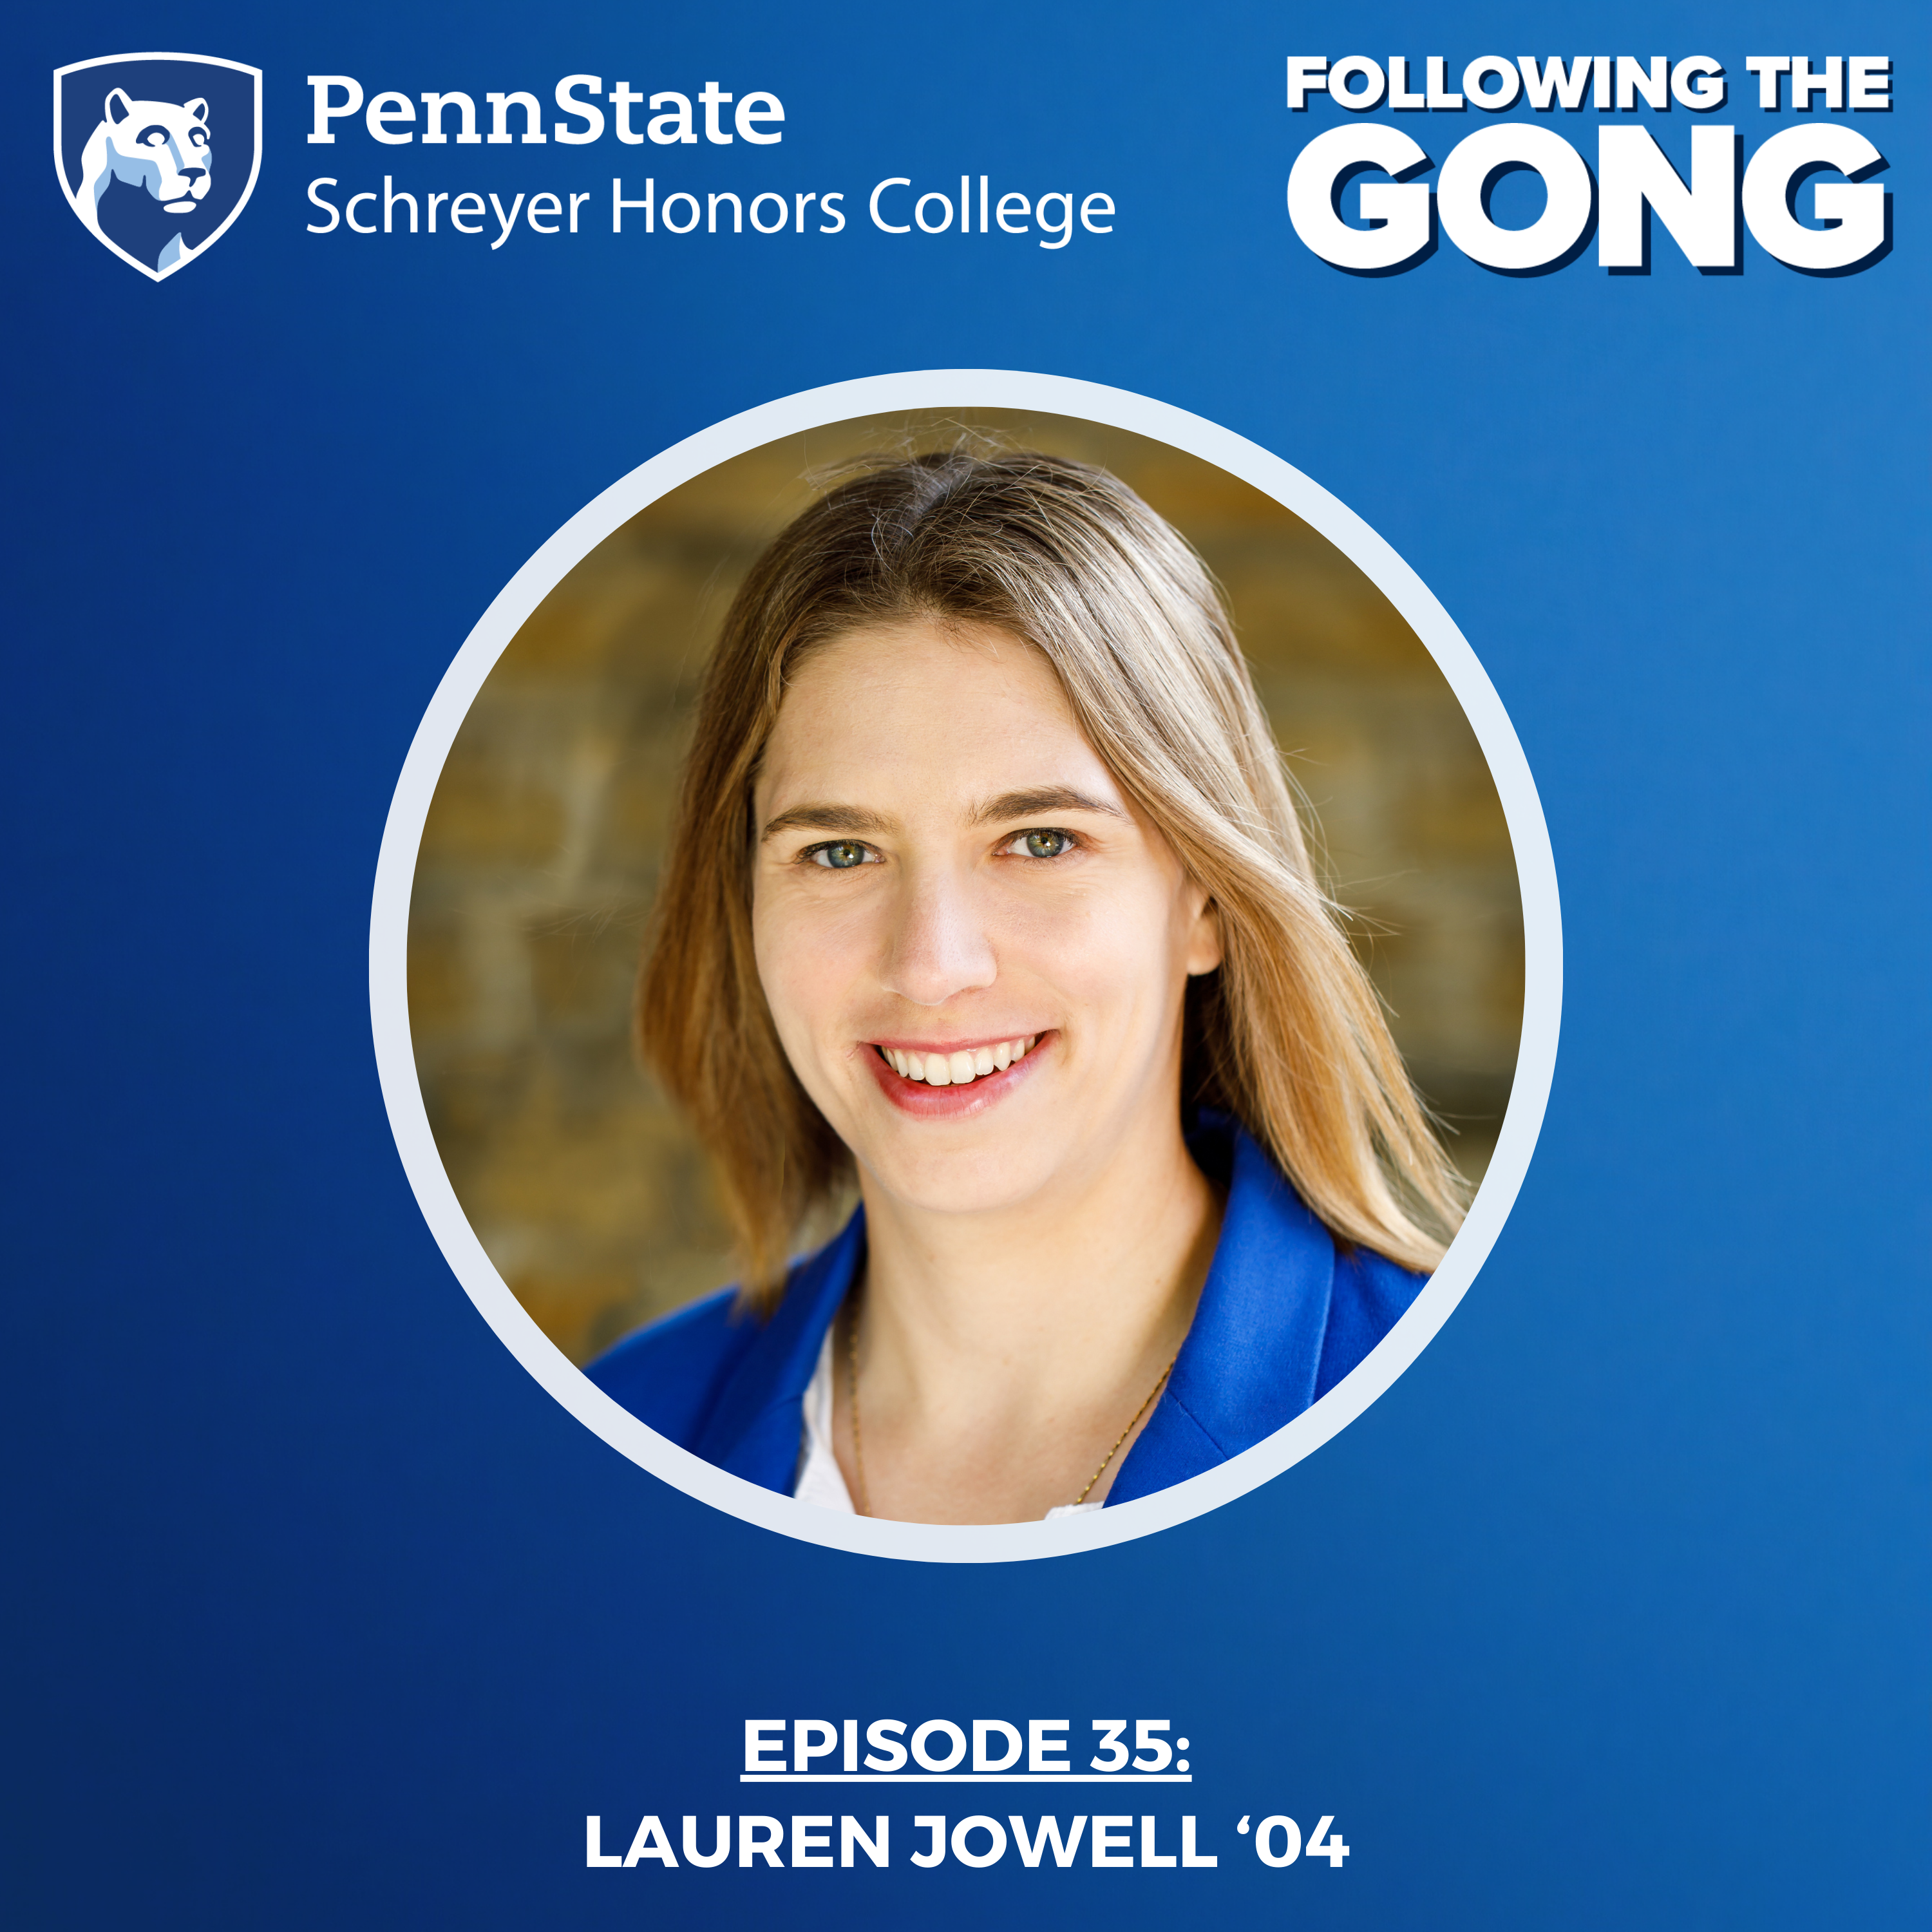 FTG 0035 – Is This As Good As It Can Be? Program Monitoring & Evaluation with Federal Department Manager Lauren Jowell '04